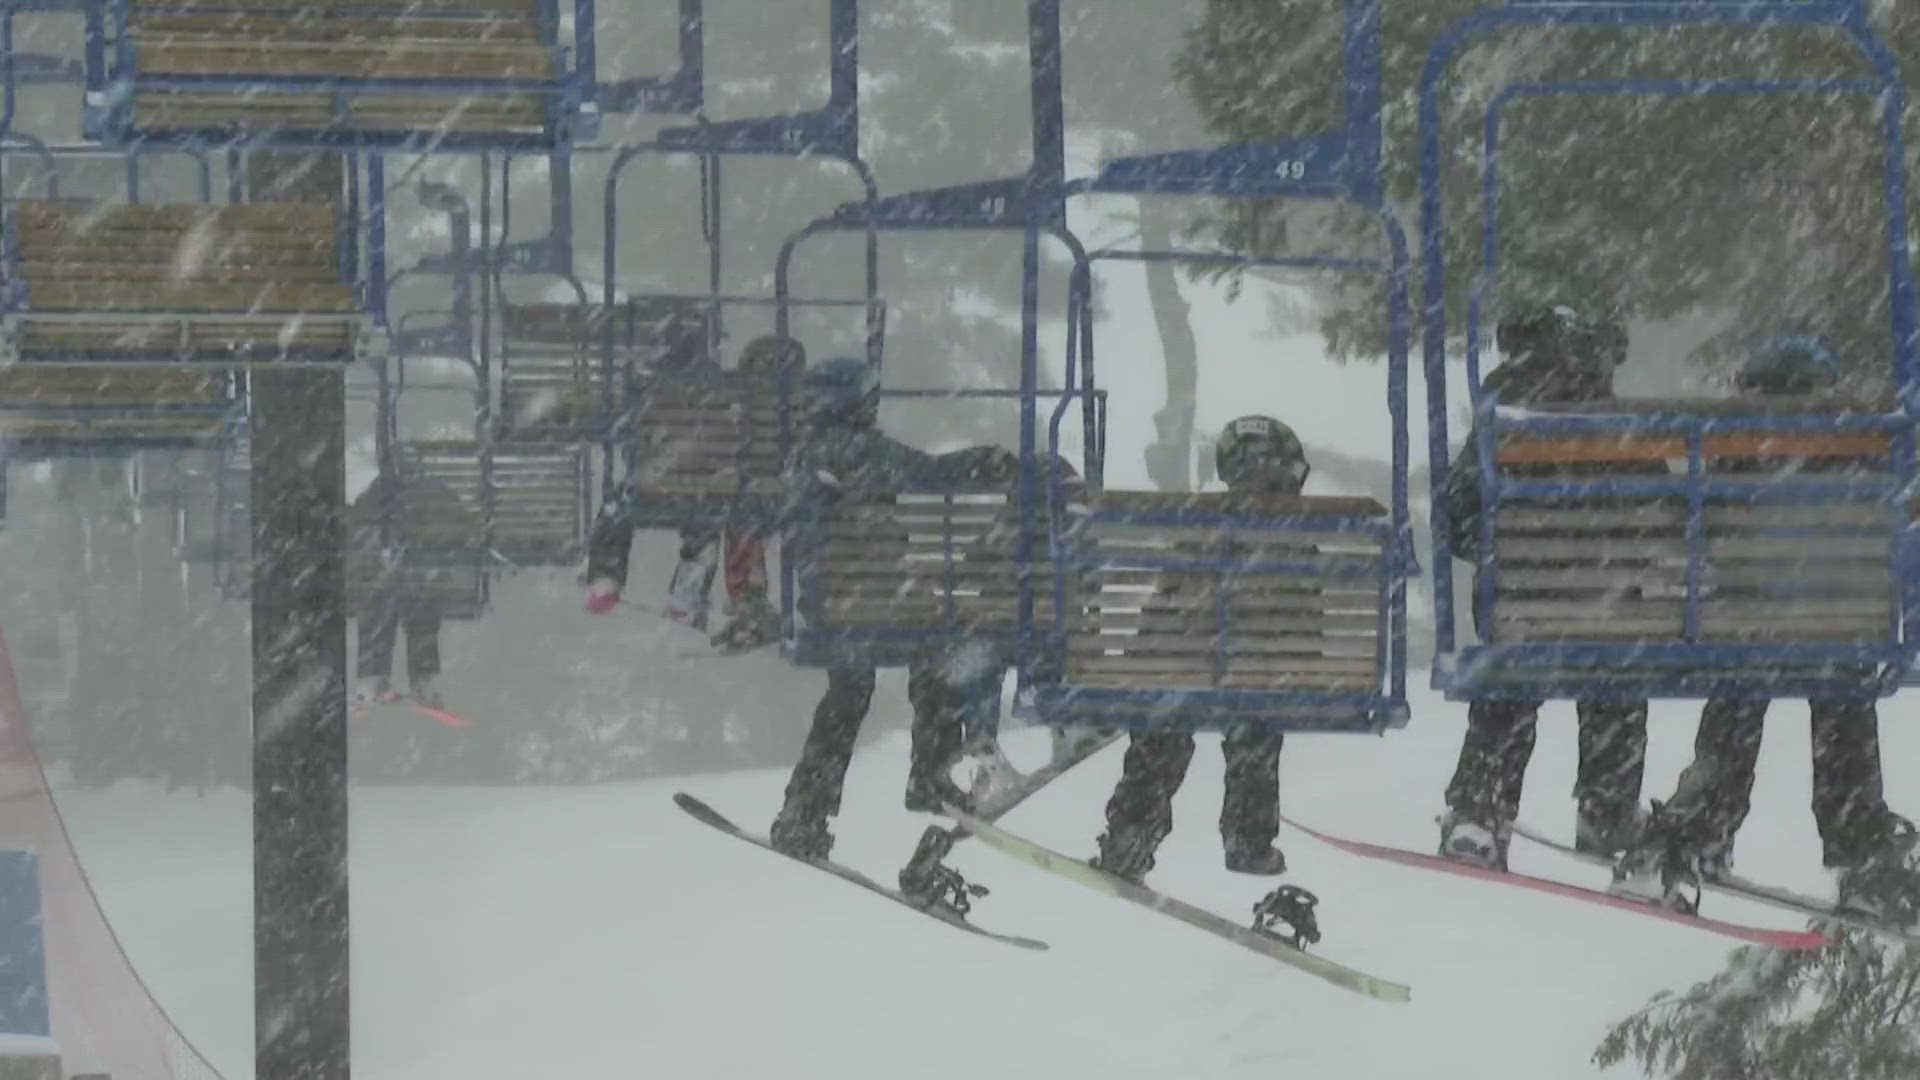 Many resorts have been waiting for the fresh snow that finally days after spring started, and it's giving at least one smaller ski area a late-season boost.